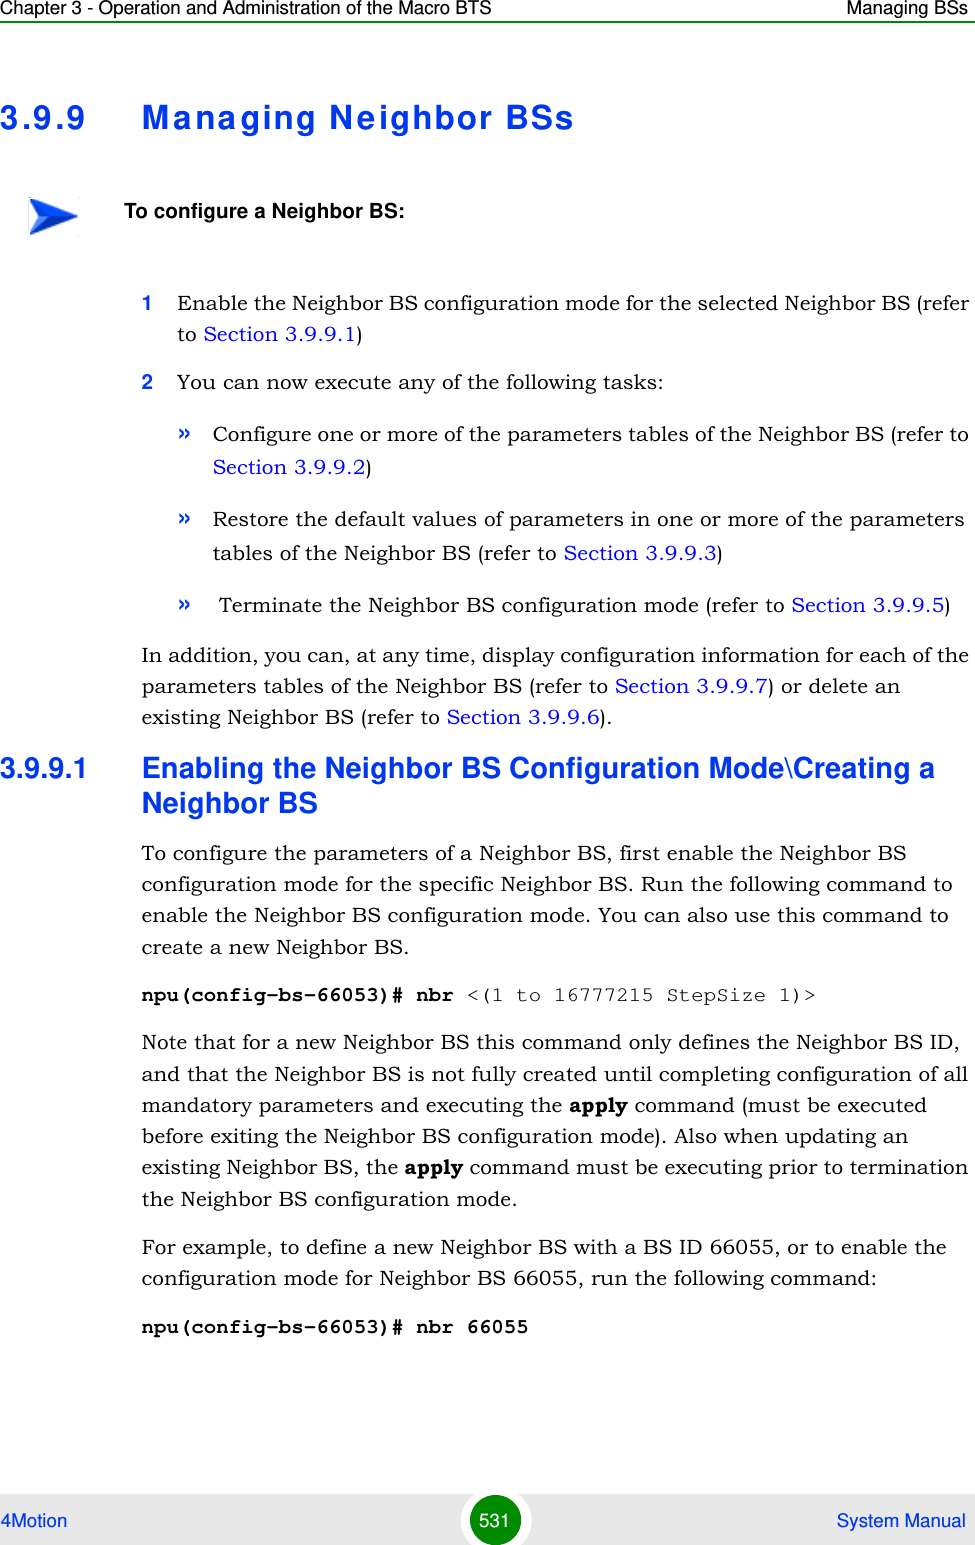 Chapter 3 - Operation and Administration of the Macro BTS Managing BSs4Motion 531  System Manual3.9 .9 Ma na ging N e ighbor BSs1Enable the Neighbor BS configuration mode for the selected Neighbor BS (refer to Section 3.9.9.1)2You can now execute any of the following tasks:»Configure one or more of the parameters tables of the Neighbor BS (refer to Section 3.9.9.2)»Restore the default values of parameters in one or more of the parameters tables of the Neighbor BS (refer to Section 3.9.9.3)» Terminate the Neighbor BS configuration mode (refer to Section 3.9.9.5)In addition, you can, at any time, display configuration information for each of the parameters tables of the Neighbor BS (refer to Section 3.9.9.7) or delete an existing Neighbor BS (refer to Section 3.9.9.6). 3.9.9.1 Enabling the Neighbor BS Configuration Mode\Creating a Neighbor BSTo configure the parameters of a Neighbor BS, first enable the Neighbor BS configuration mode for the specific Neighbor BS. Run the following command to enable the Neighbor BS configuration mode. You can also use this command to create a new Neighbor BS. npu(config-bs-66053)# nbr &lt;(1 to 16777215 StepSize 1)&gt;Note that for a new Neighbor BS this command only defines the Neighbor BS ID, and that the Neighbor BS is not fully created until completing configuration of all mandatory parameters and executing the apply command (must be executed before exiting the Neighbor BS configuration mode). Also when updating an existing Neighbor BS, the apply command must be executing prior to termination the Neighbor BS configuration mode.For example, to define a new Neighbor BS with a BS ID 66055, or to enable the configuration mode for Neighbor BS 66055, run the following command:npu(config-bs-66053)# nbr 66055To configure a Neighbor BS: